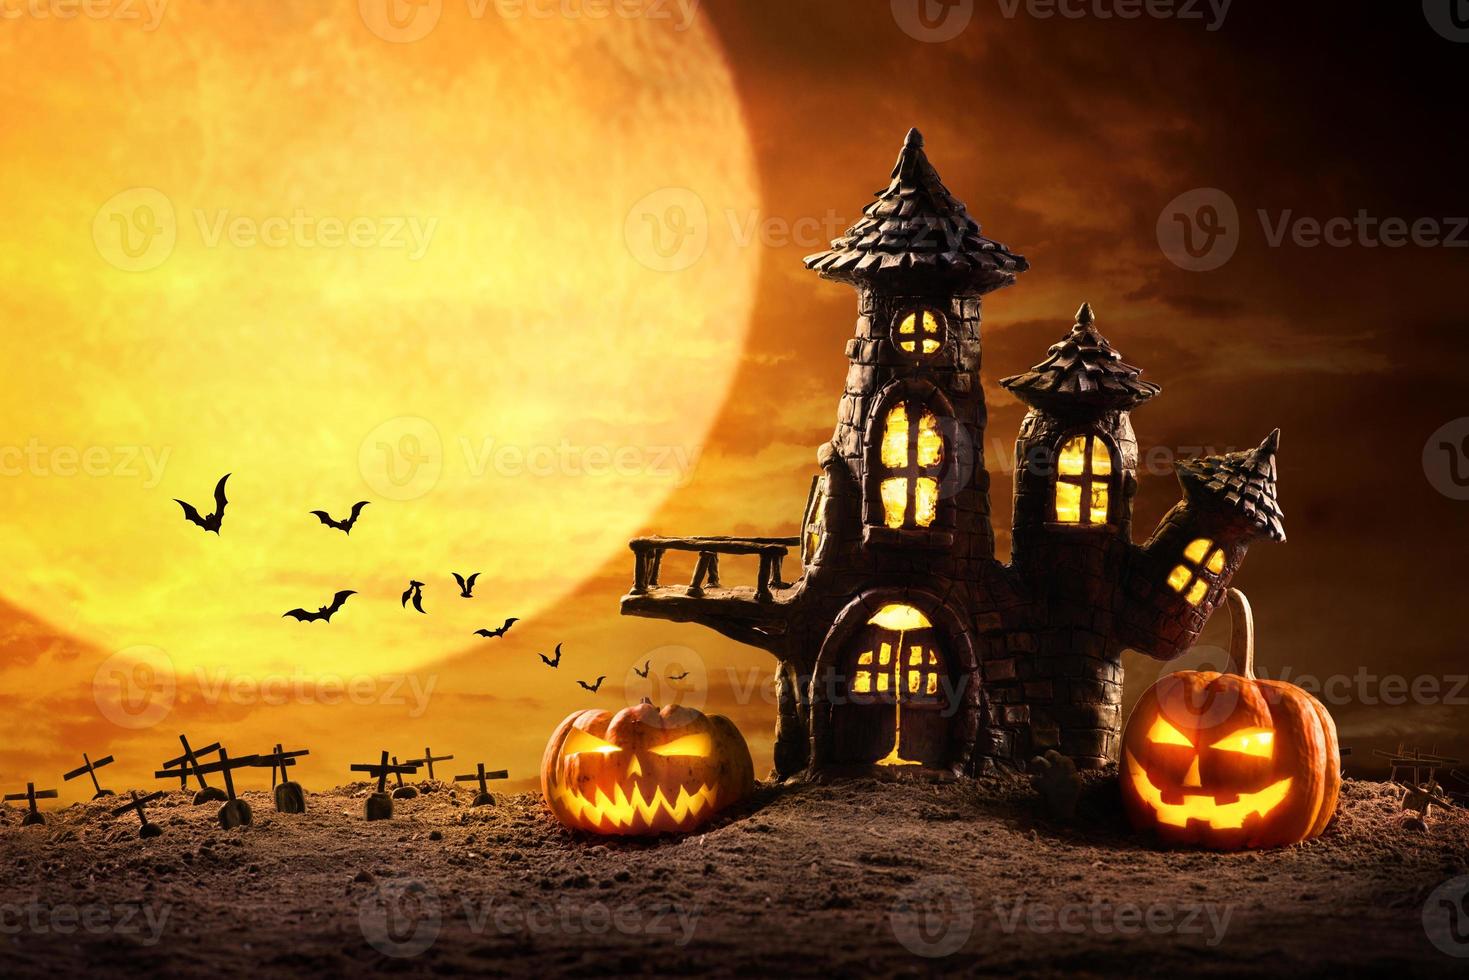 Halloween pumpkins and Castle spooky in night of full moon and bats flying photo